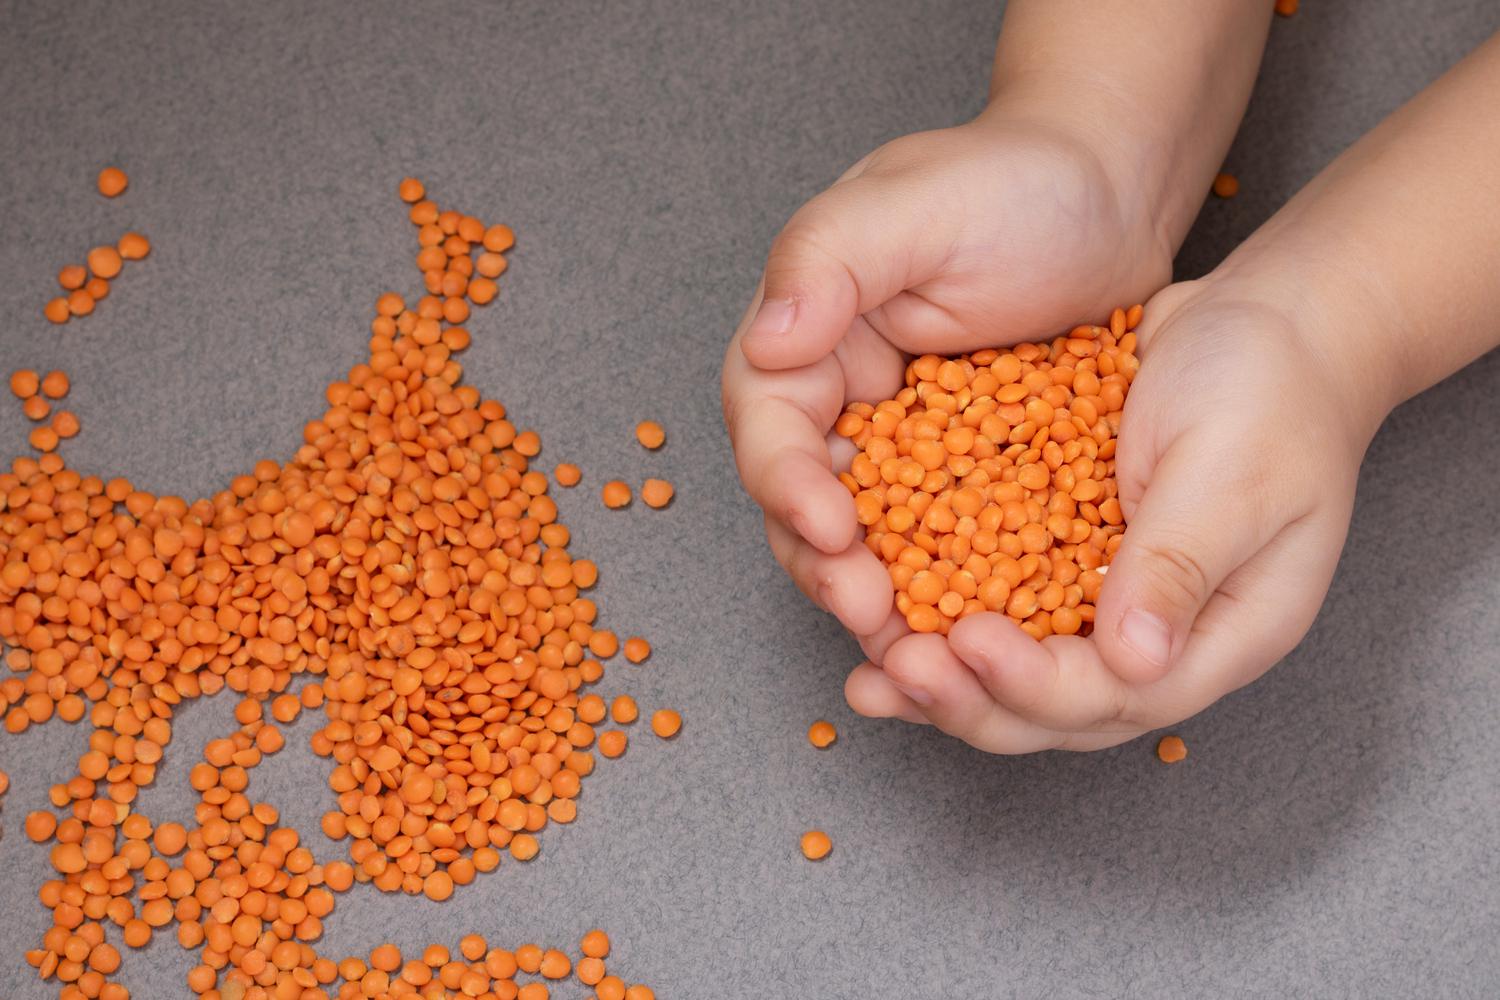 Lentils For Babies: When To Start, Benefits and Precautions